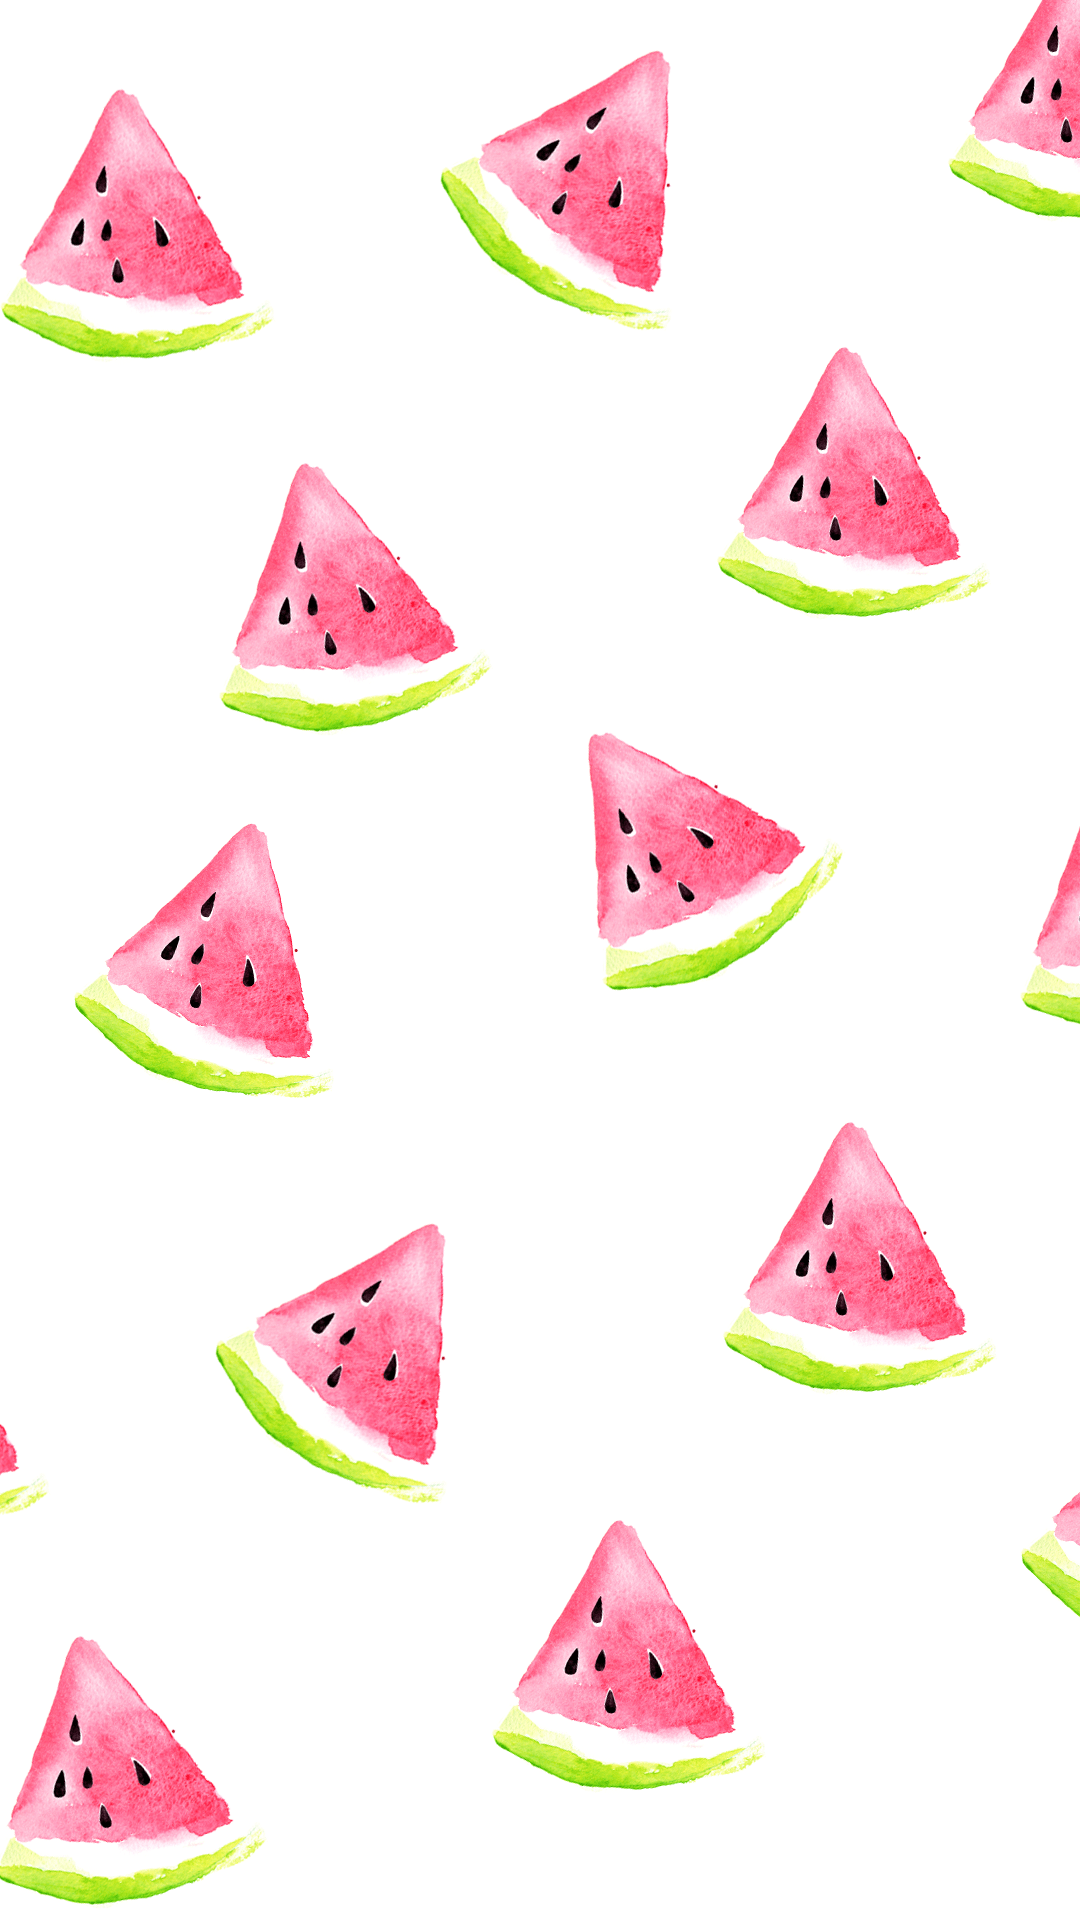 Free download Related image Watermelon wallpaper Wallpaper iphone summer [1080x1920] for your Desktop, Mobile & Tablet. Explore Watermelon Wallpaper. Watermelon Wallpaper